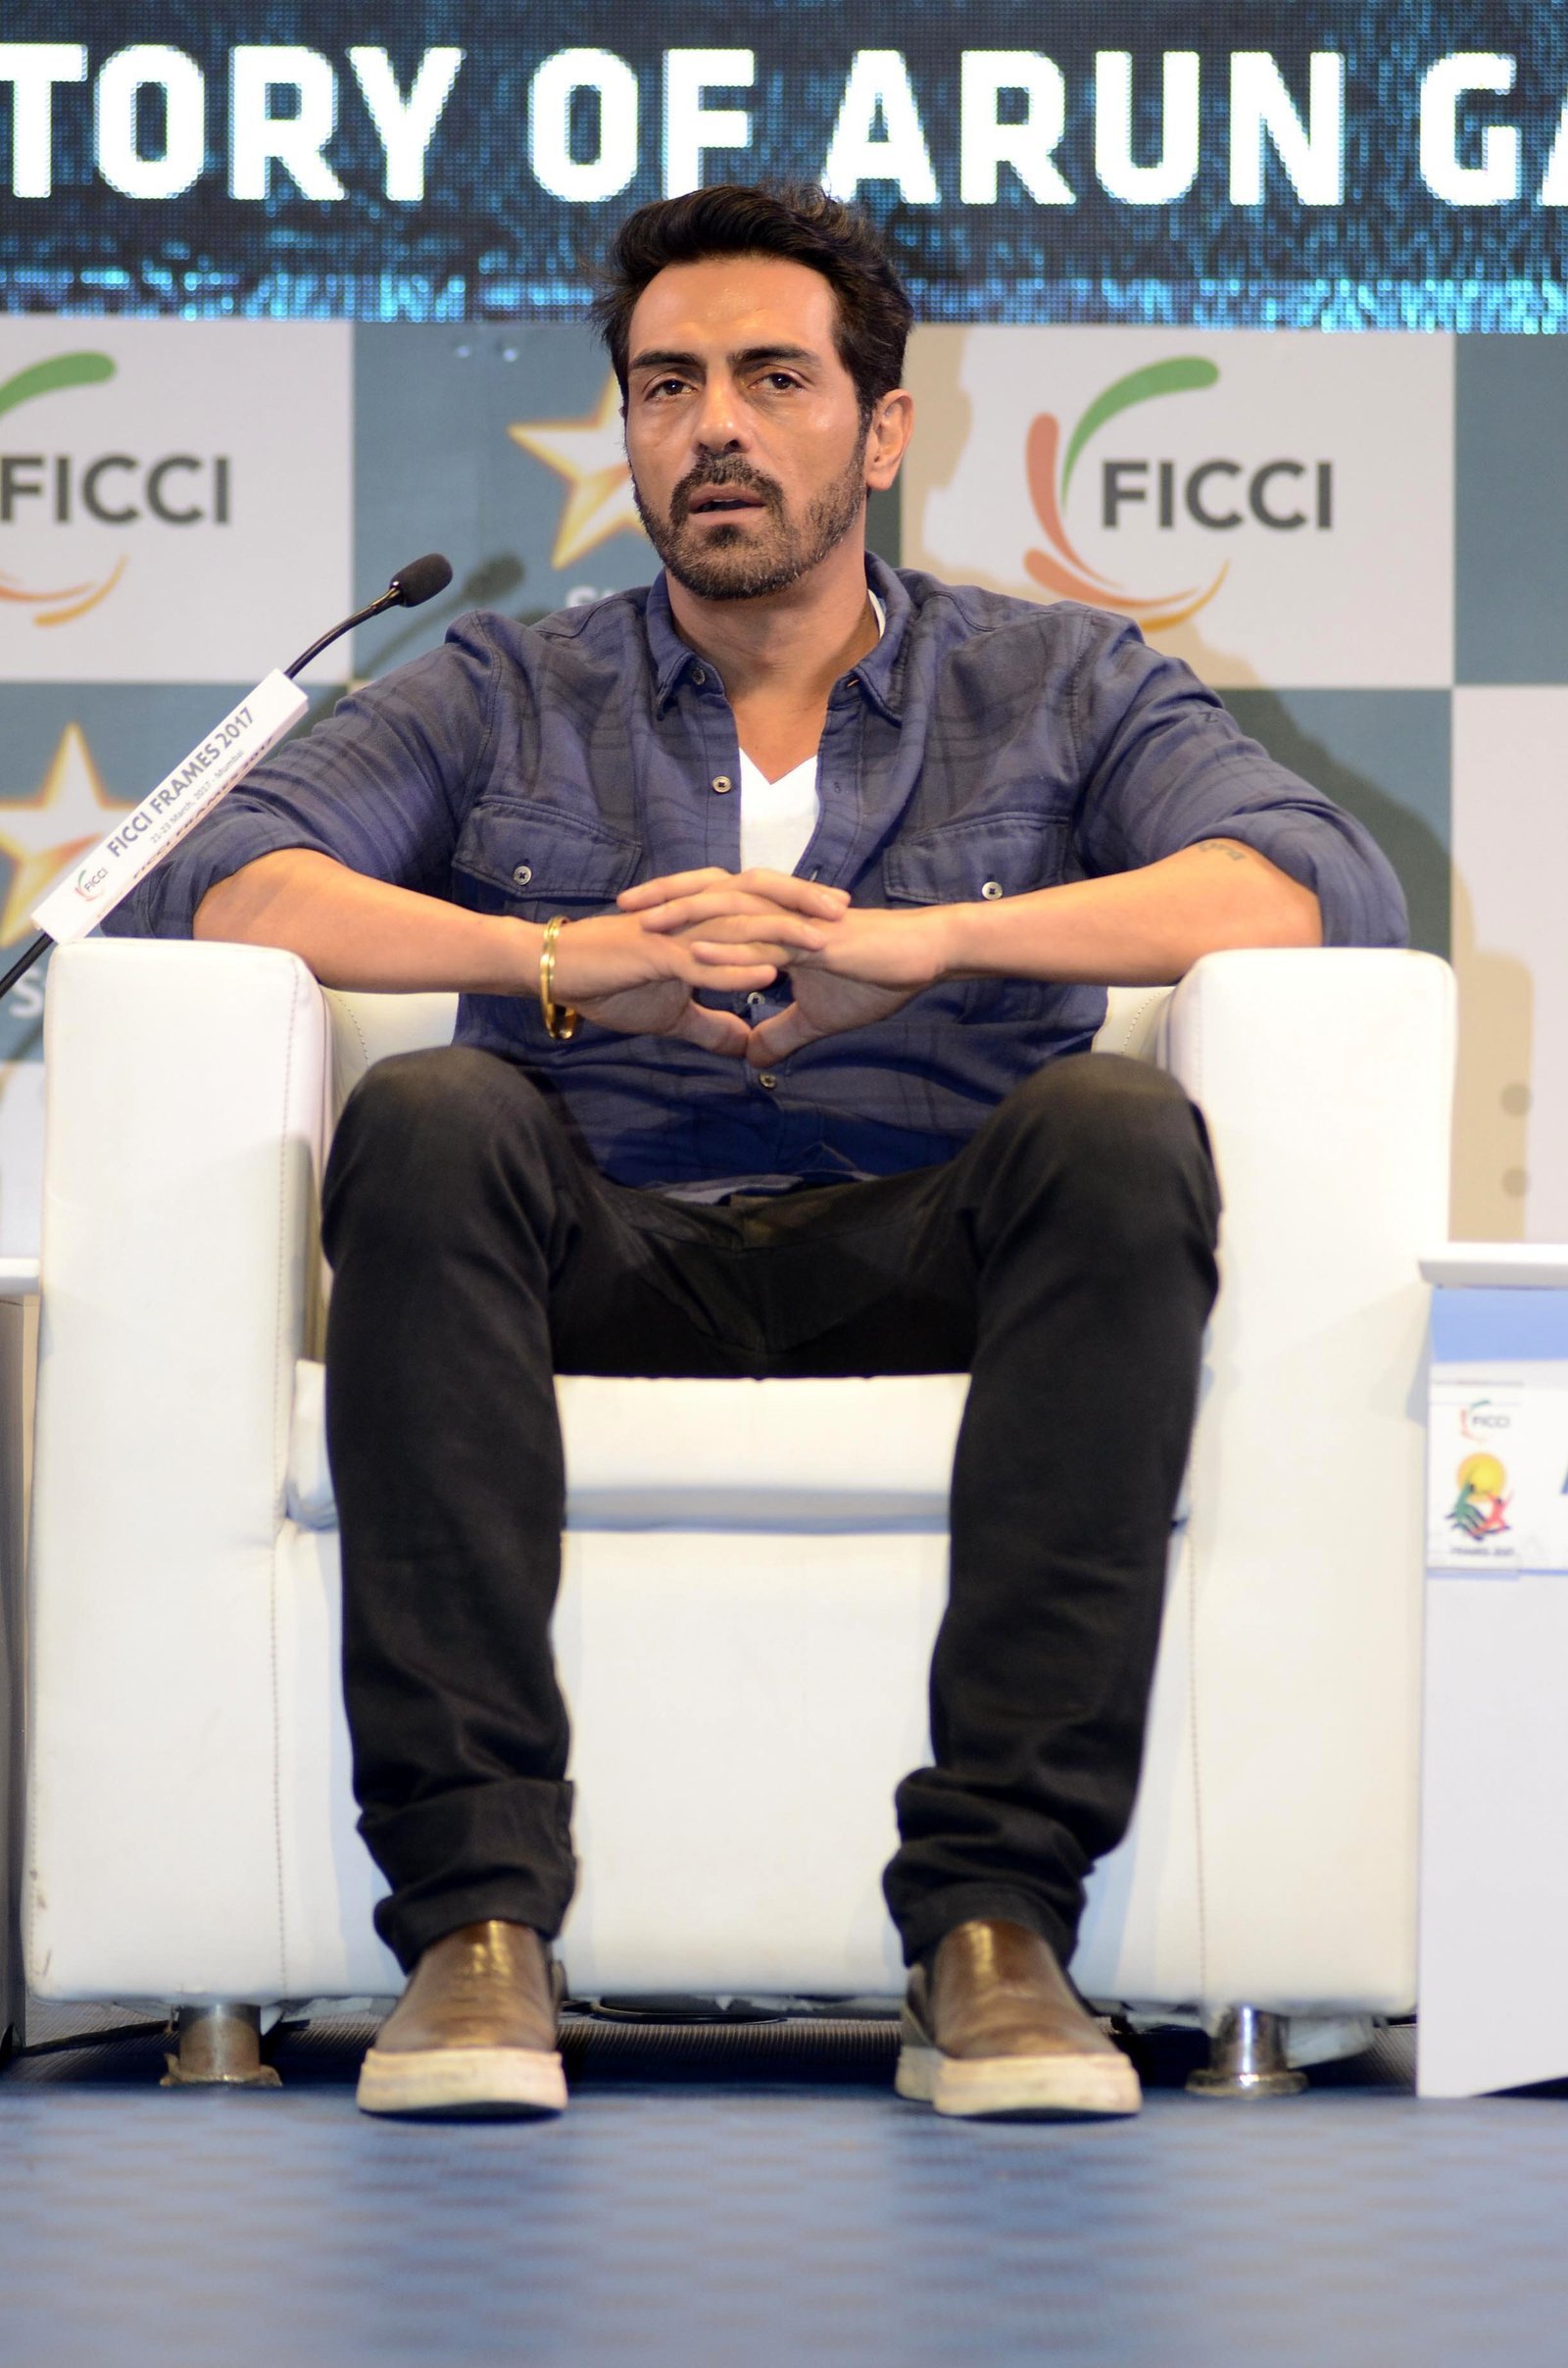 Arjun Rampal at FICCI Event Photos | Picture 1486192